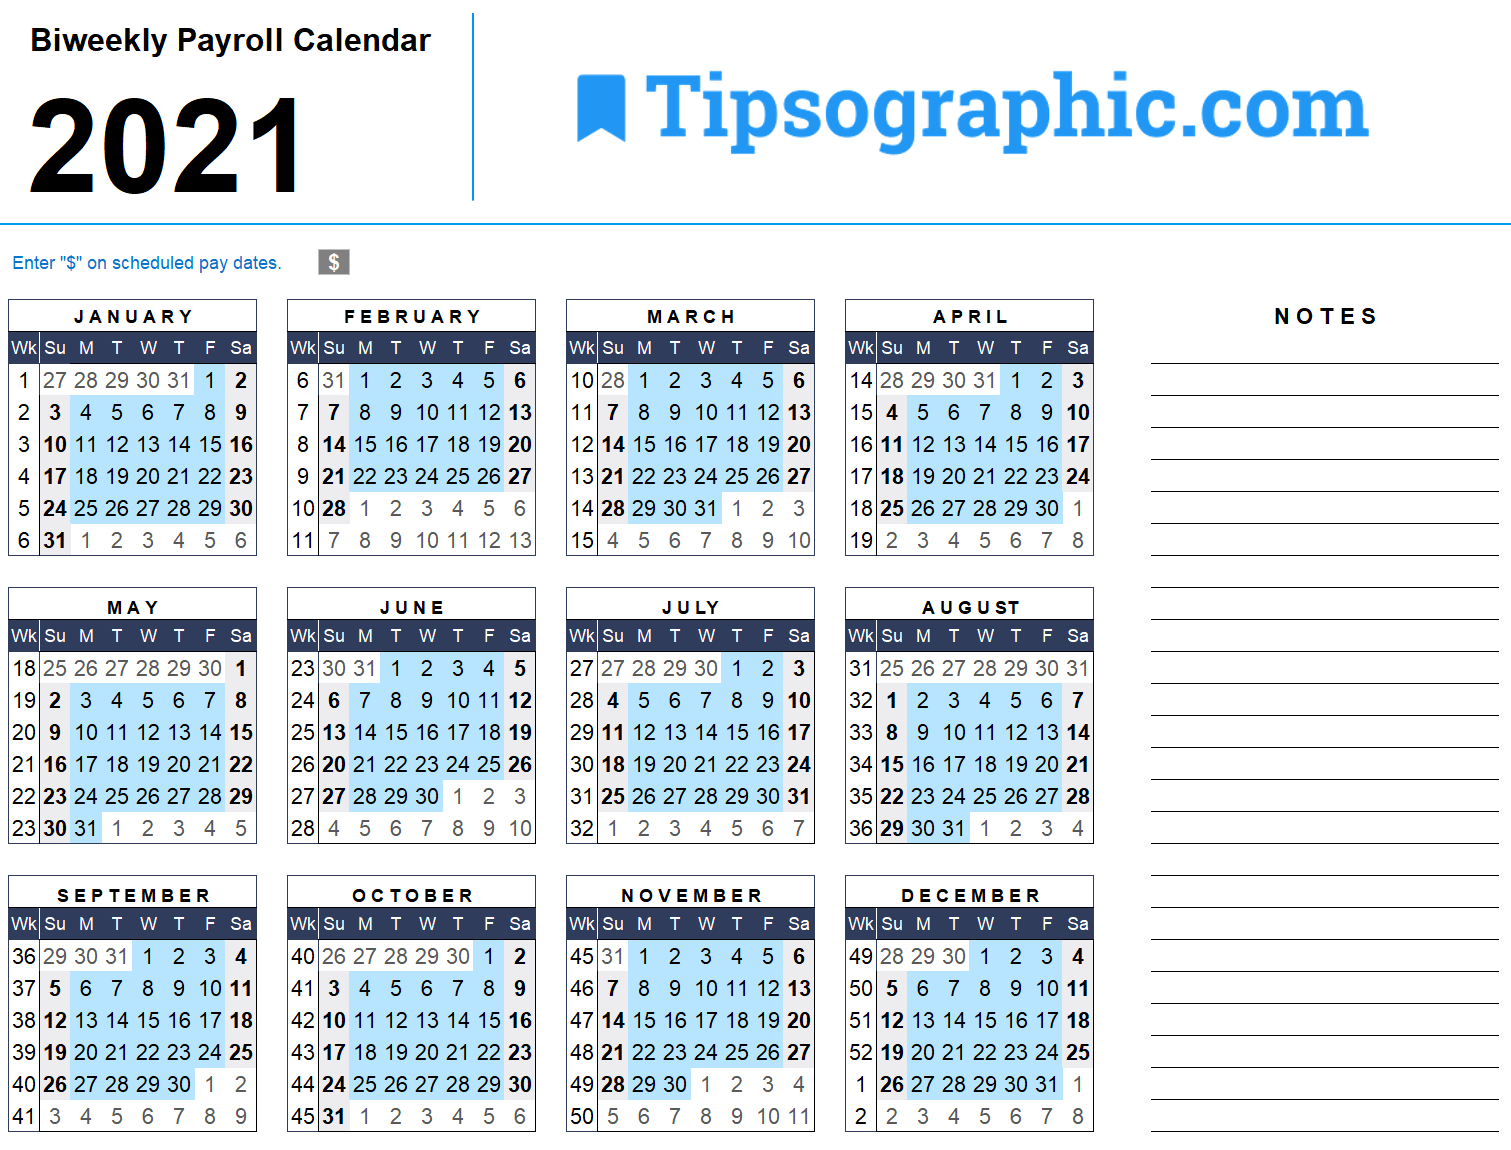 Download The 2021 Biweekly Payroll Calendar | Tipsographic-2021 Employee Vacation Calendar Excel